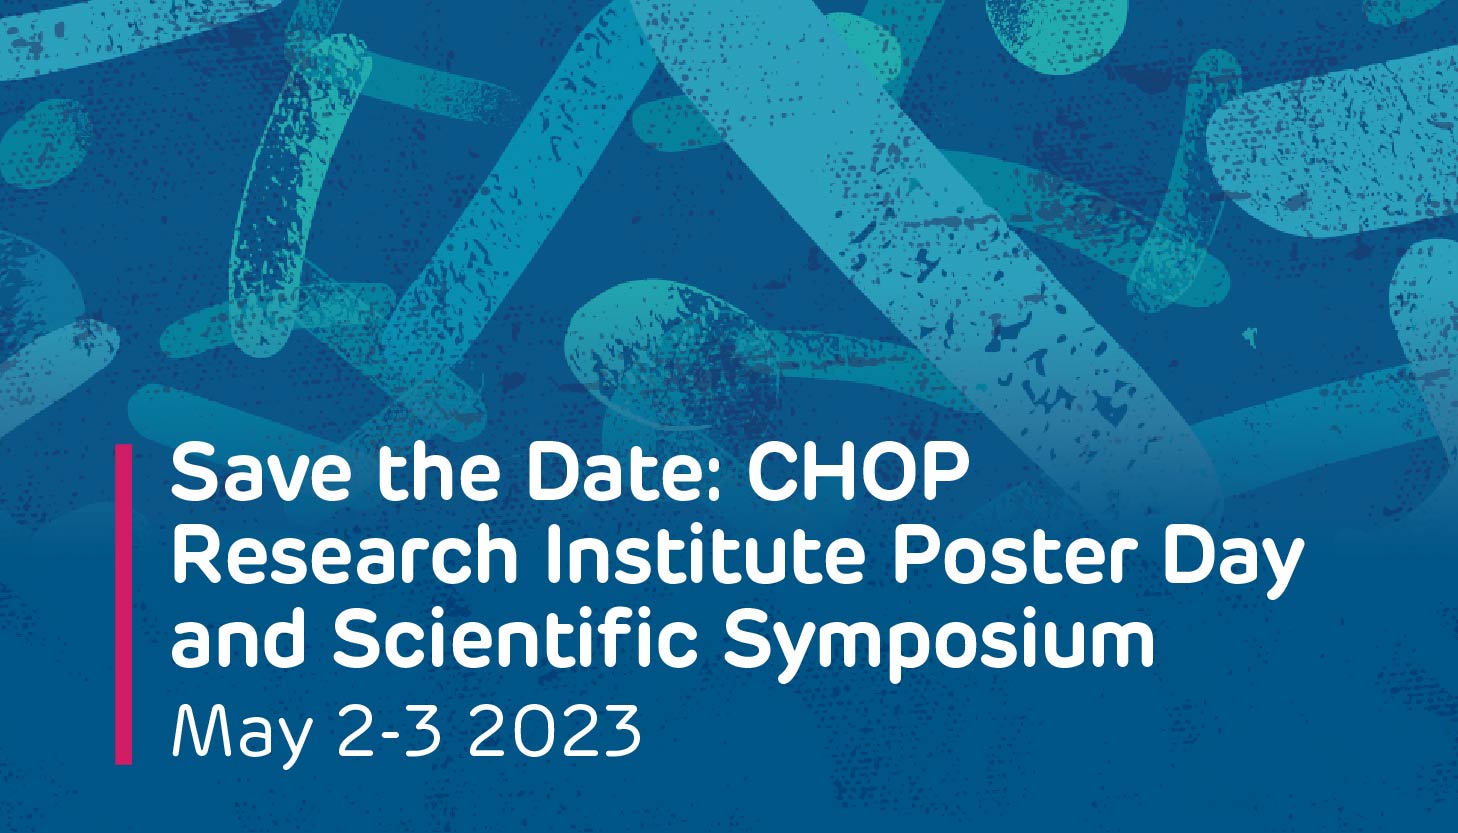 Save the Date: CHOP Research Institute Poster Day and Scientific Symposium